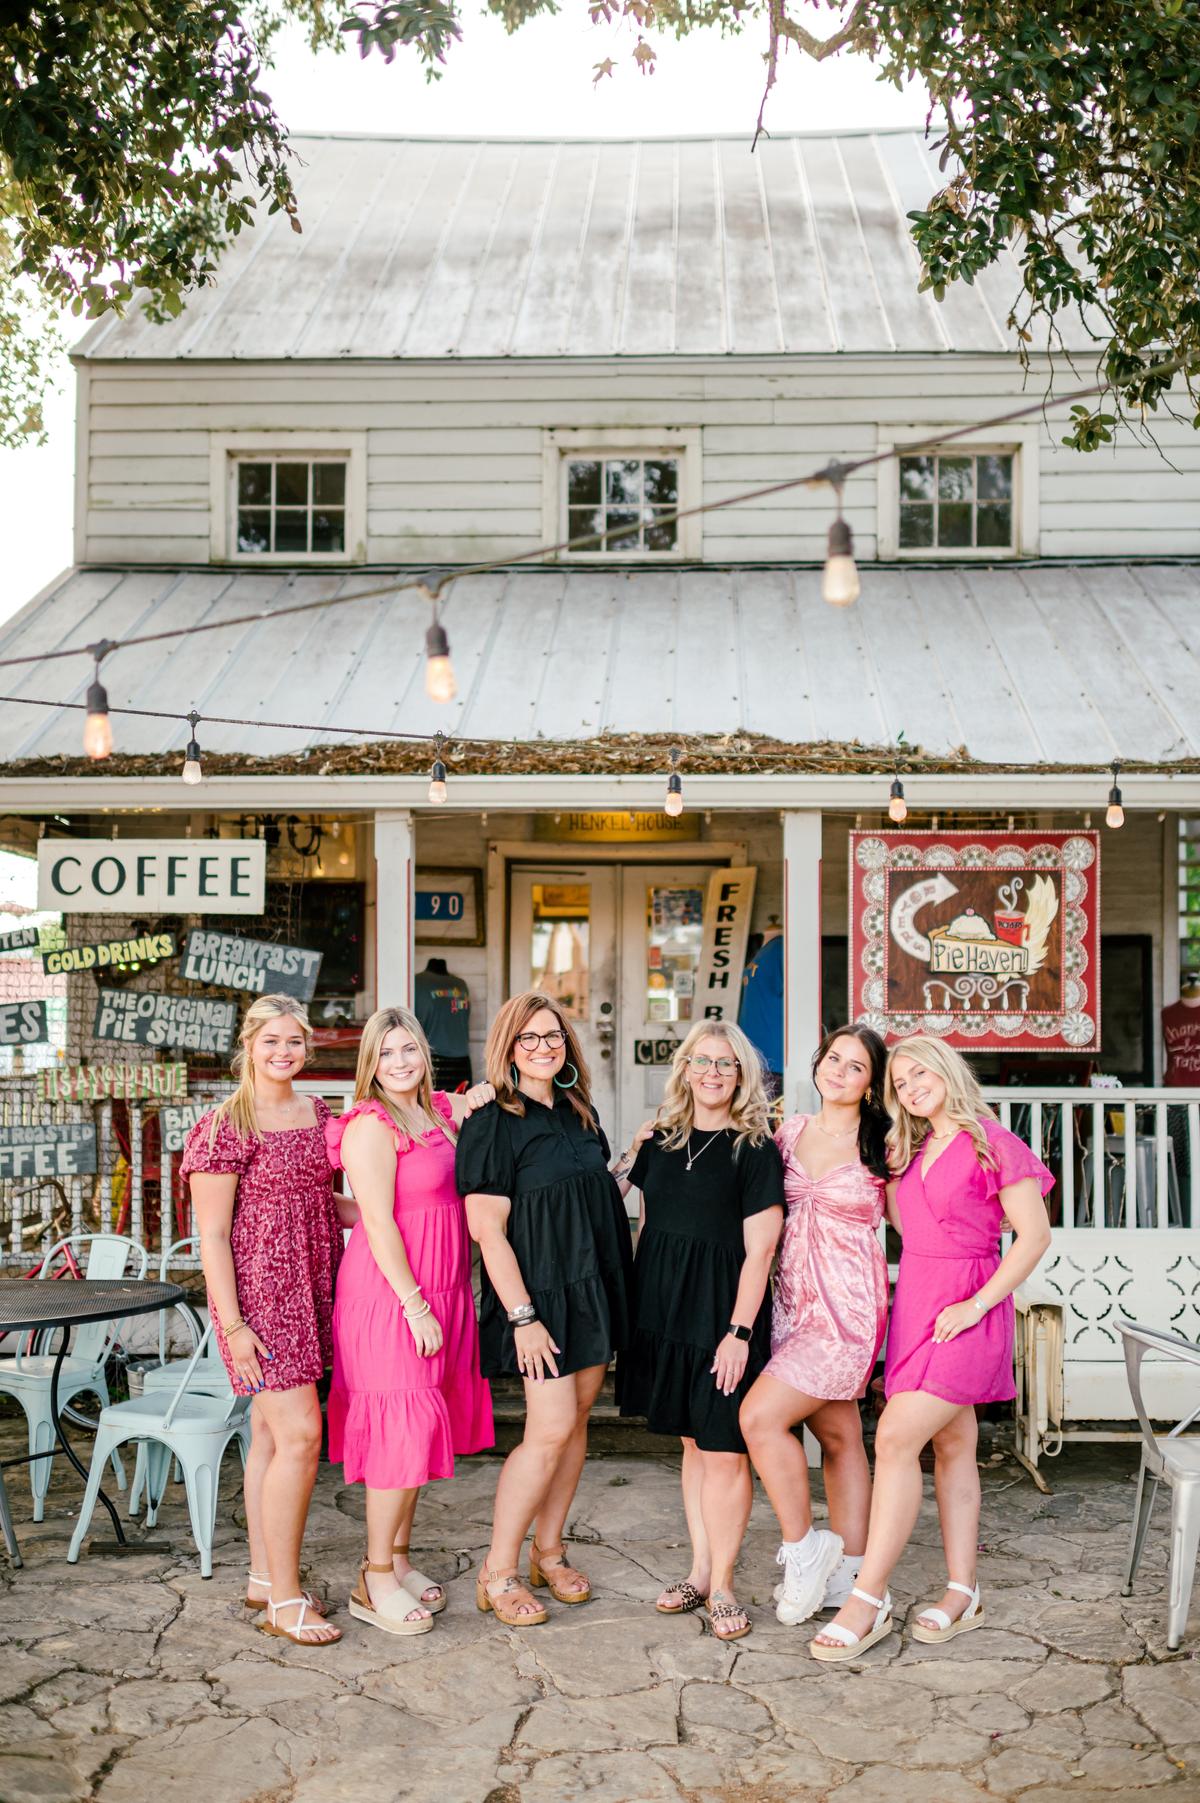 Tara Royer Steele (third from left) created Royers Pie Haven in Round Top, Texas to be a place for people to go when “when life is hard, and you want to sit under a big ol’ oak tree and eat a piece of pie and escape.” (Courtesy of Ellen Renee Photography)